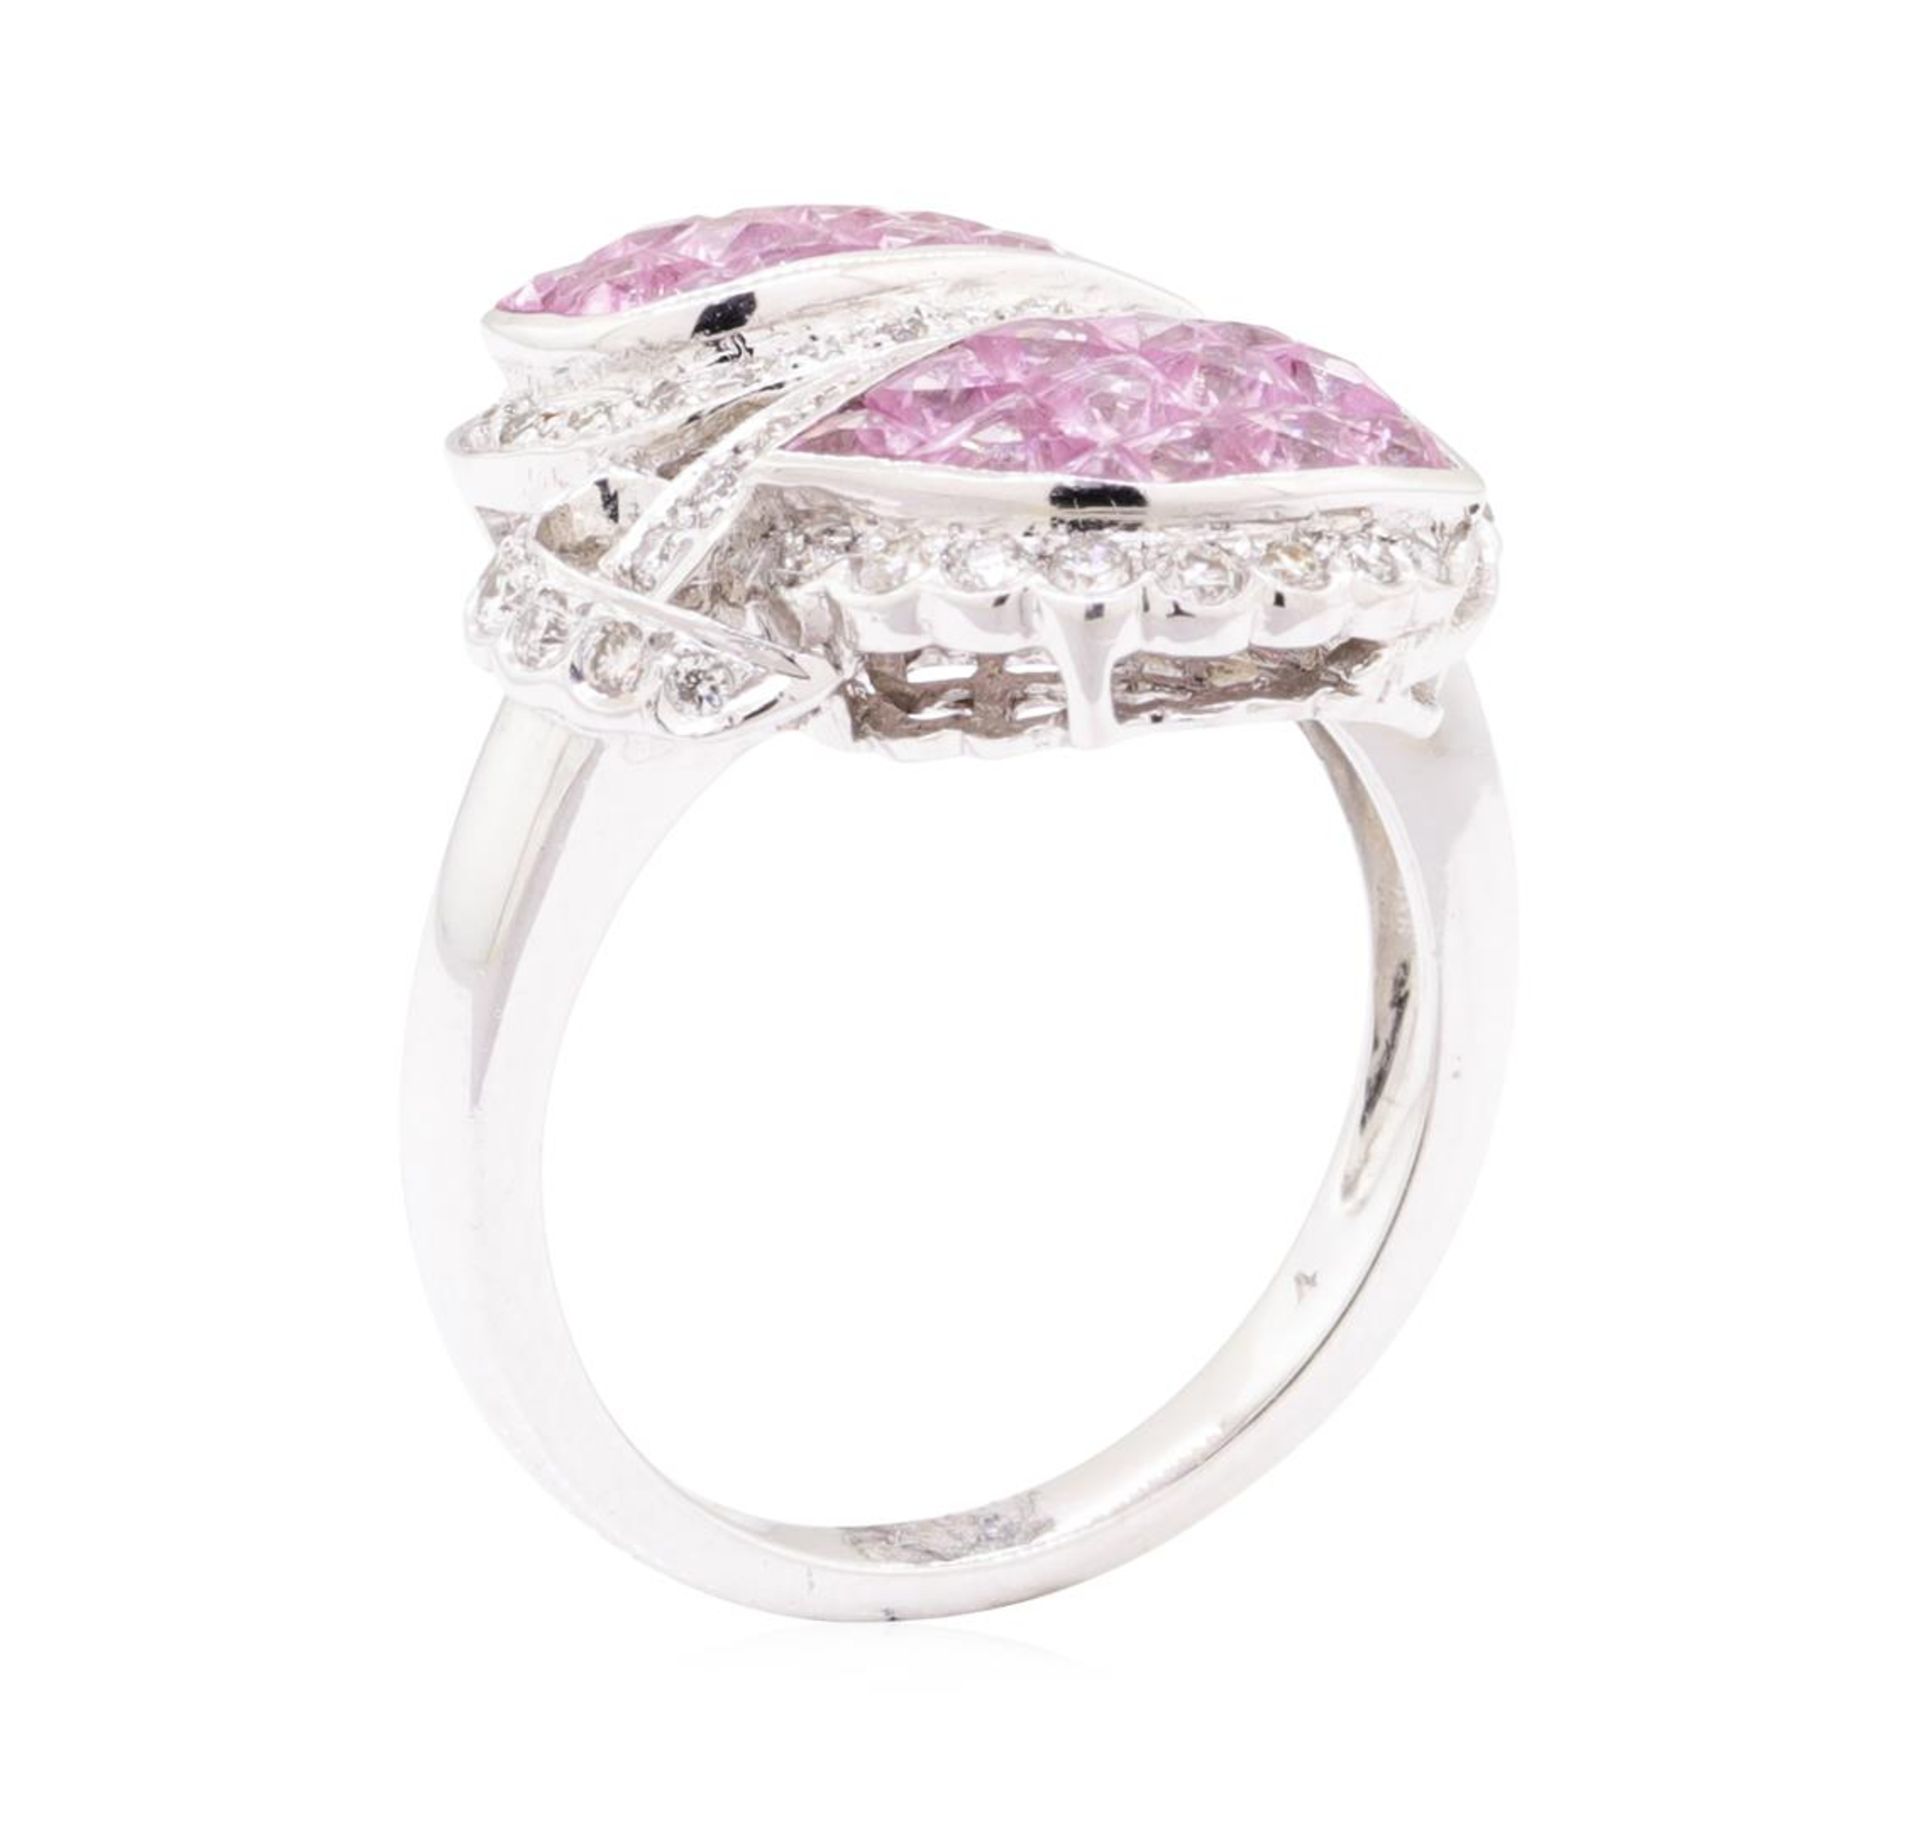 2.40 ctw Pink Sapphire And Diamond Ring - 18KT White Gold - Image 4 of 5